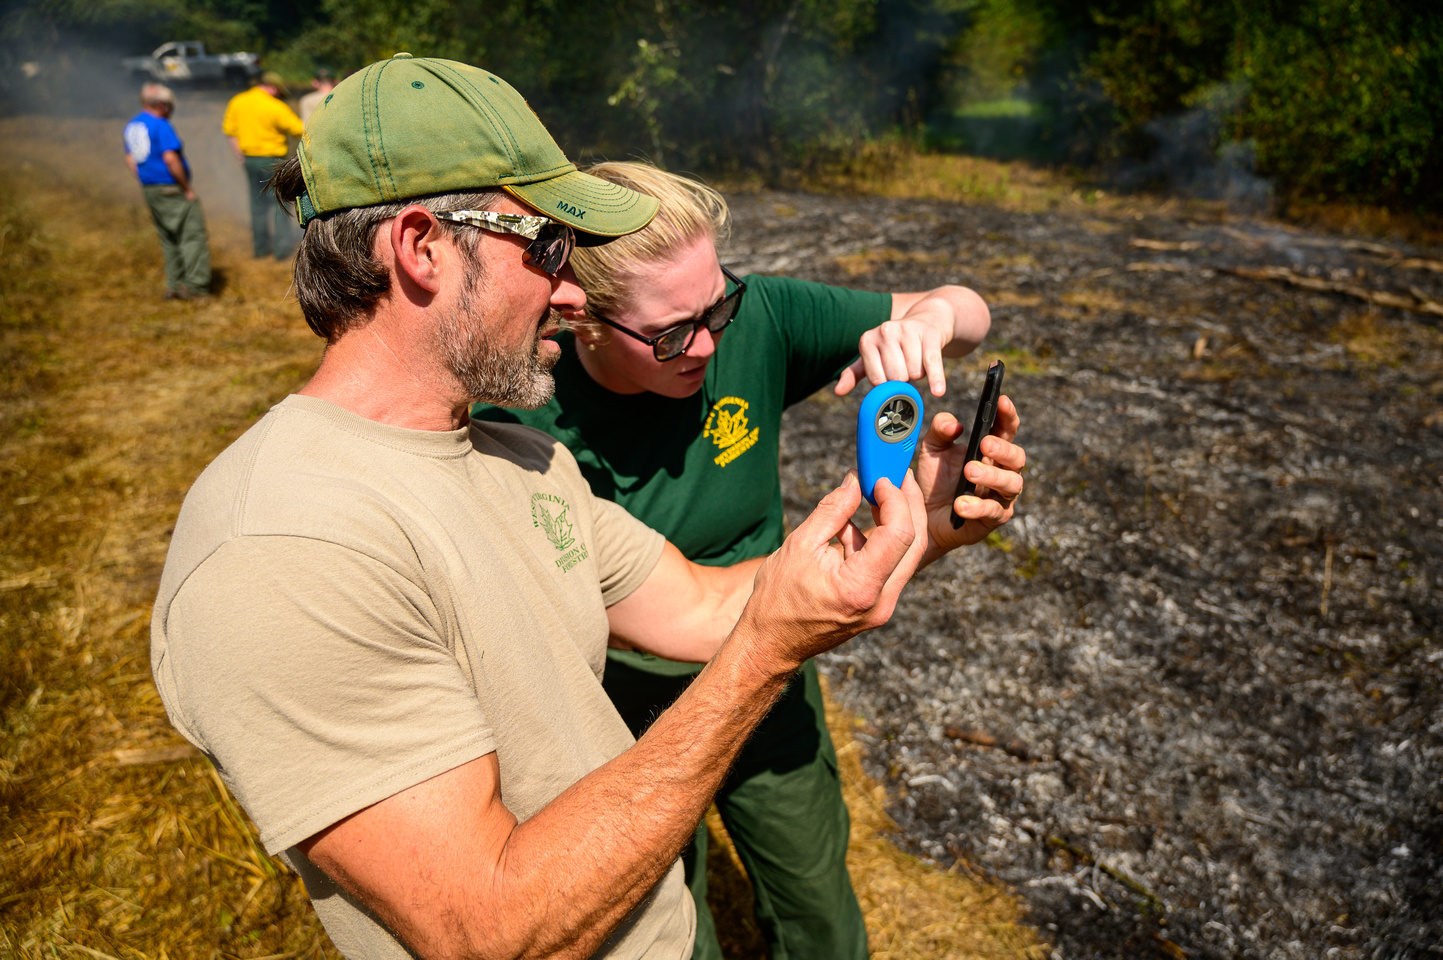 Service Foresters Dan Cooley and Mary Murdock taking weather reading during the investigation of a fire scenario. Used to include or exclude certain causes of wildfires.